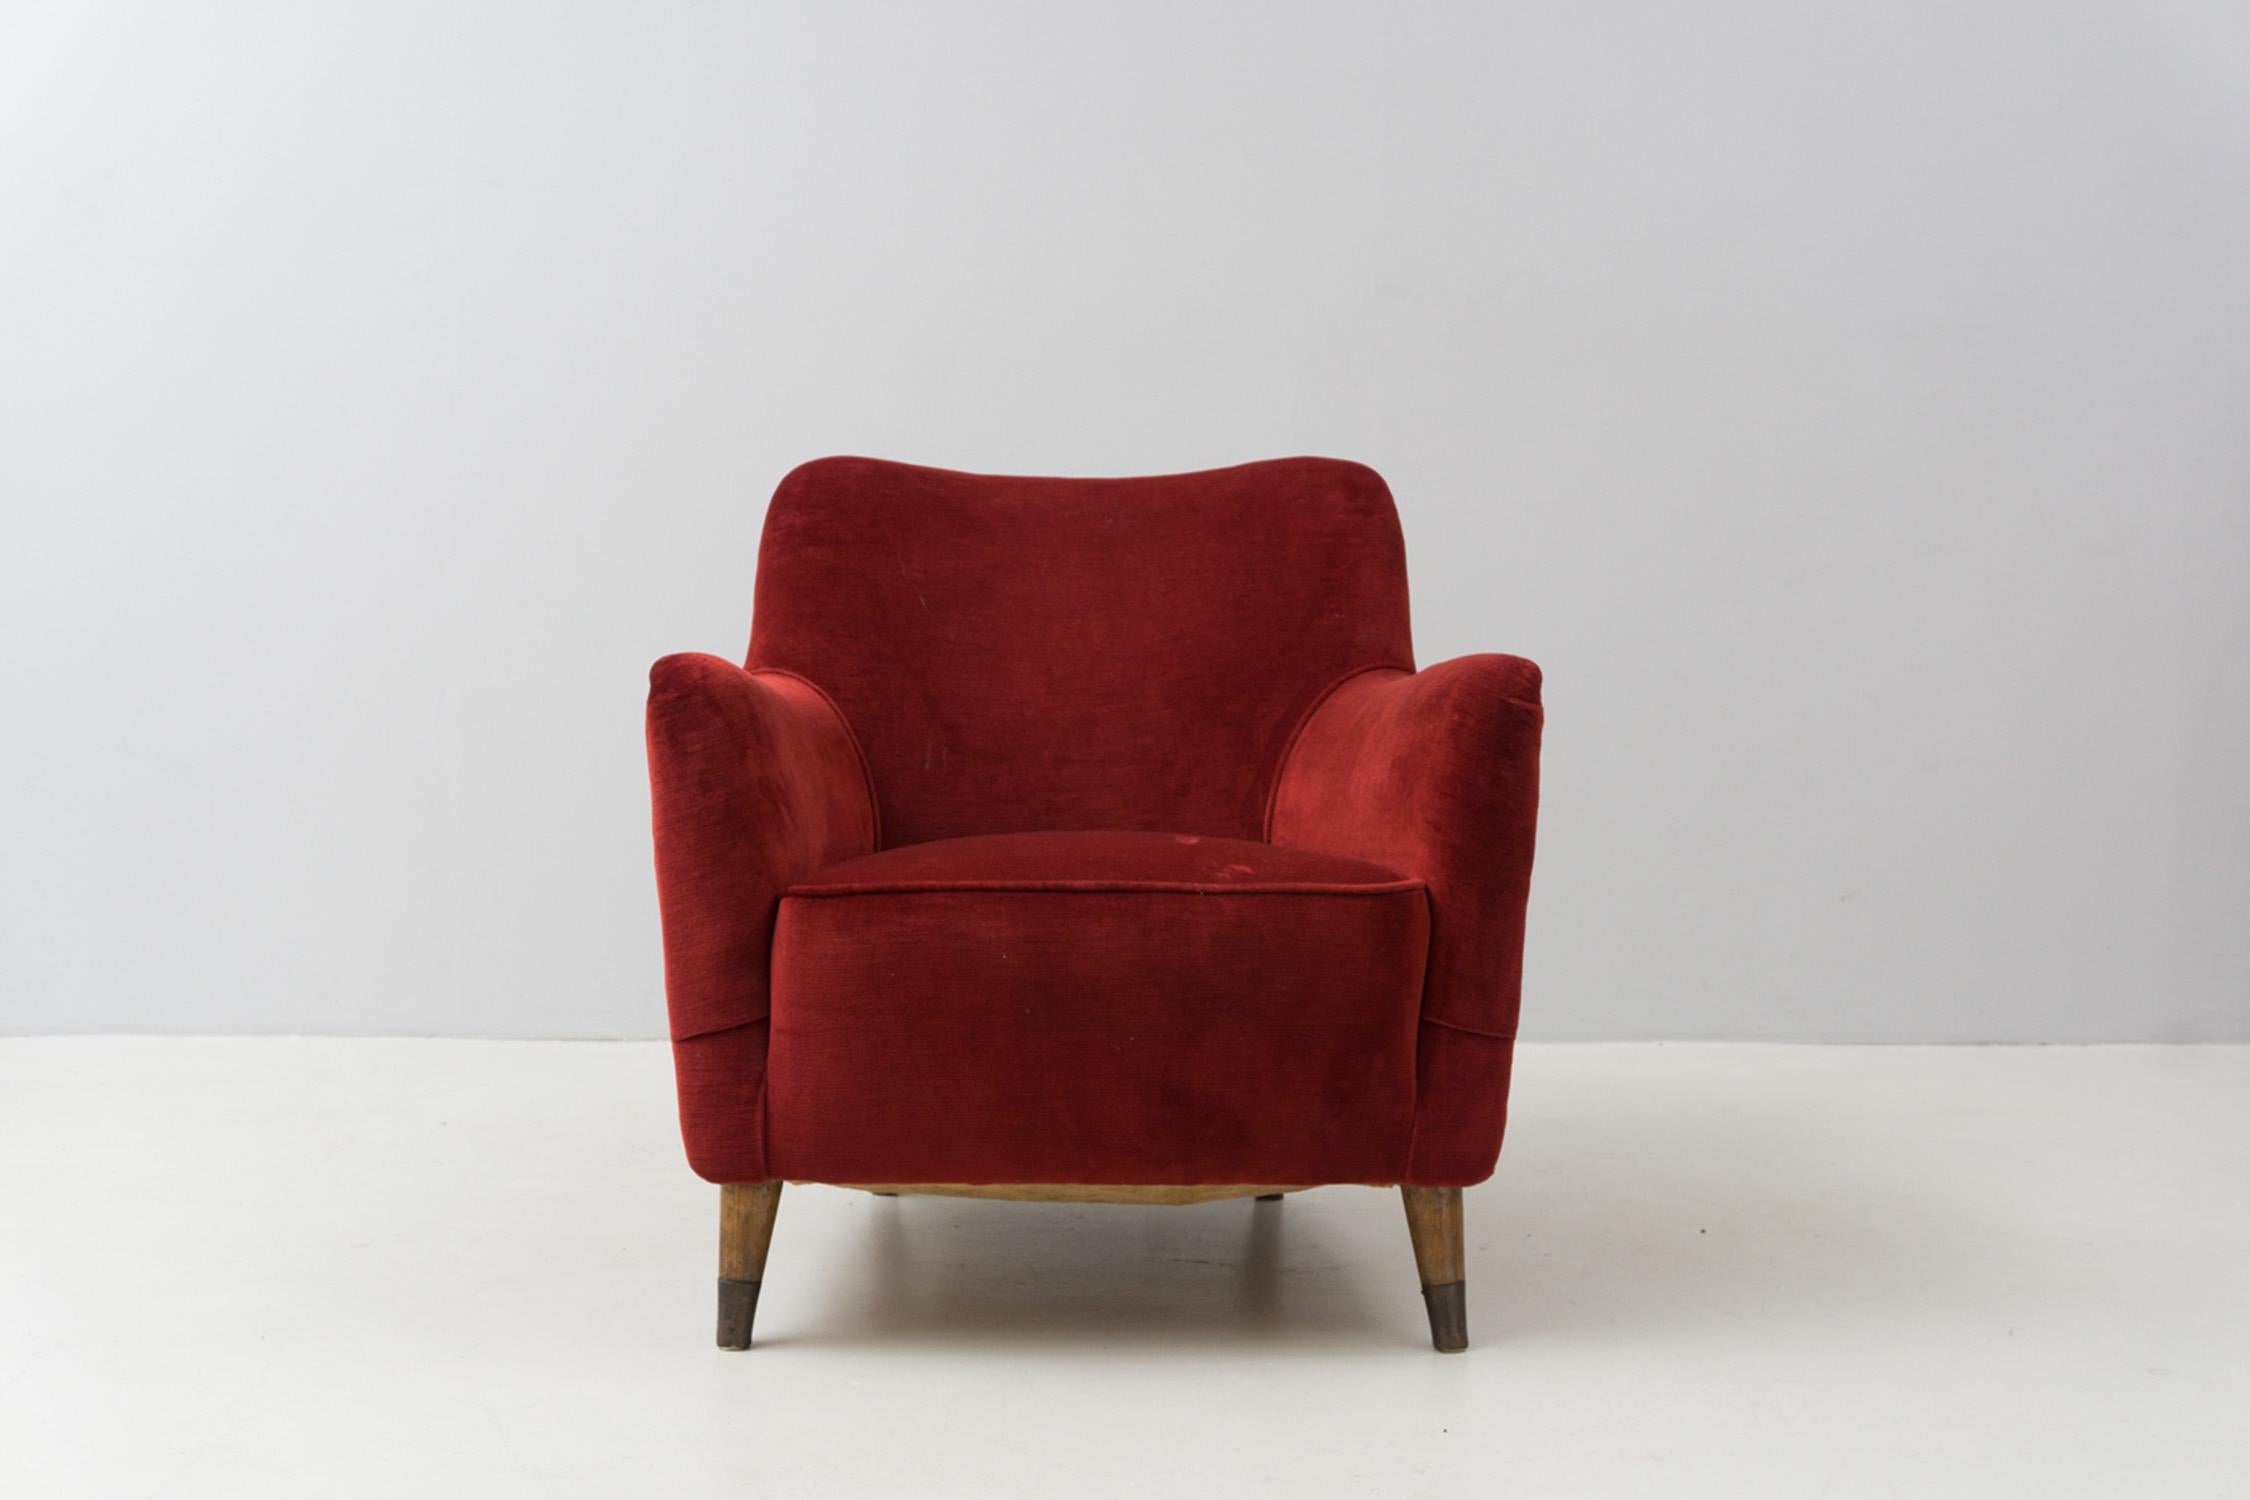 Modern Pair of Armchairs, Red Velvet, by Gio Ponti, 1949